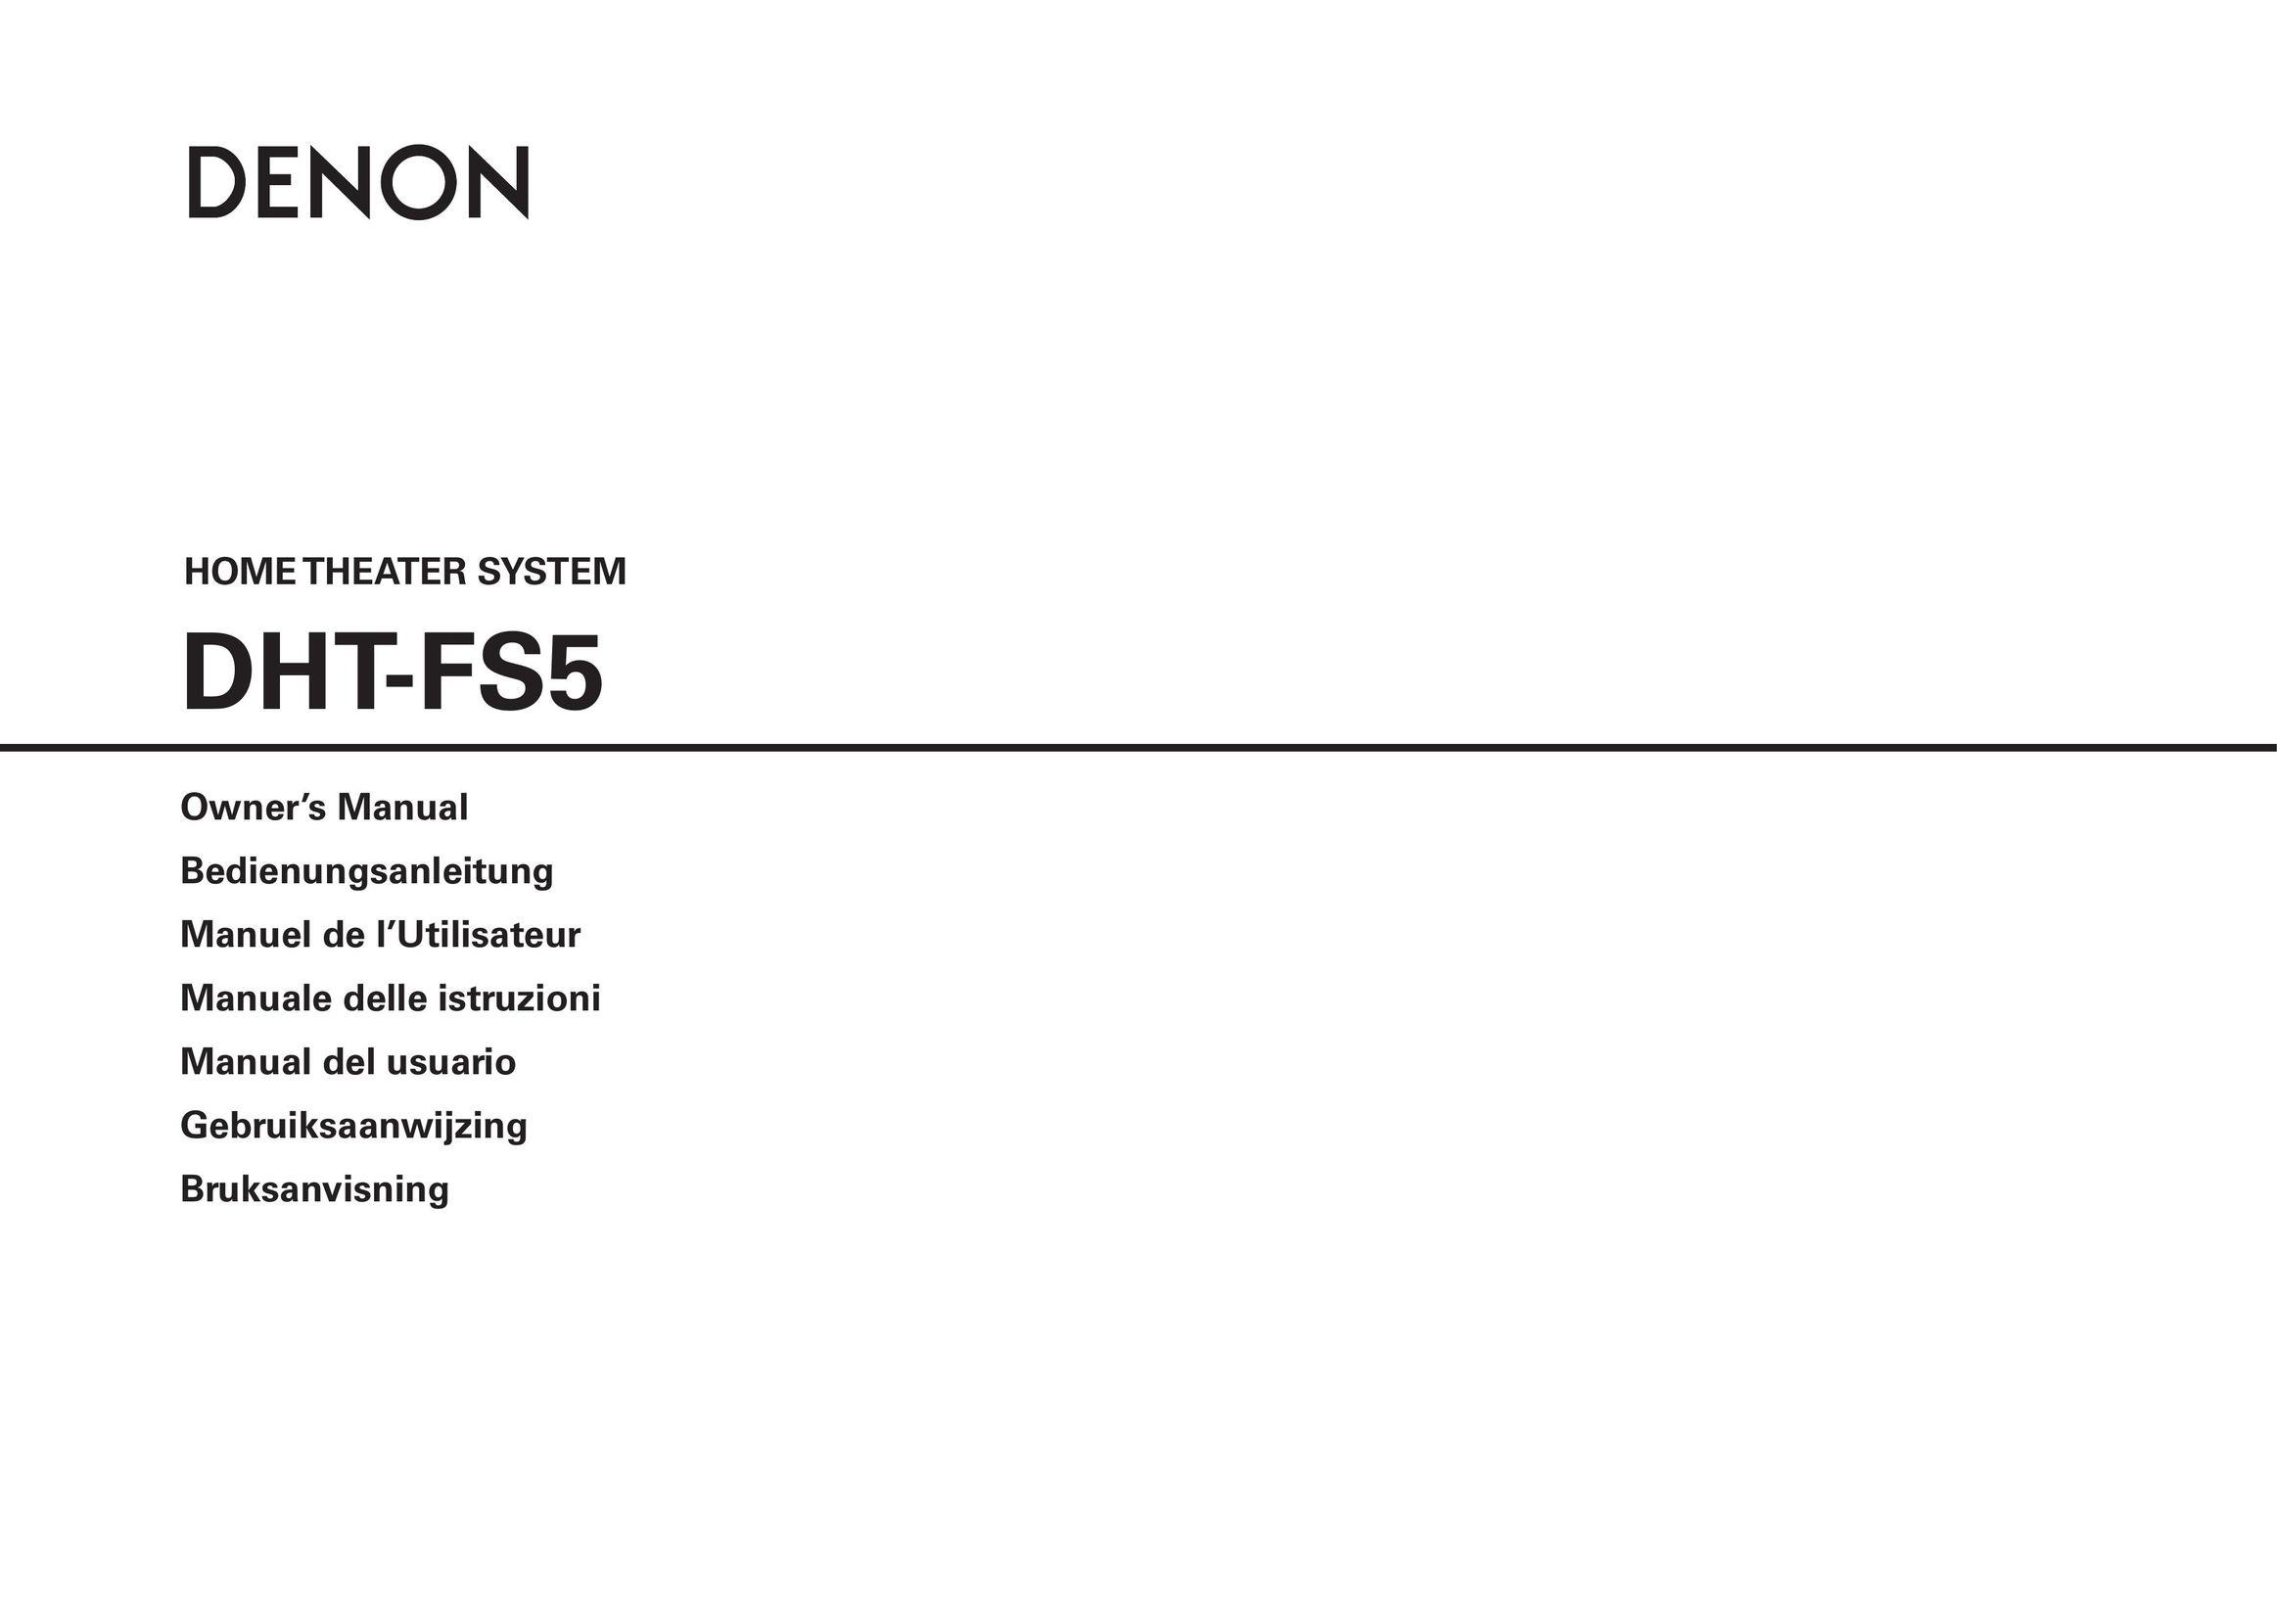 Denon DHT-FS5 Home Theater System User Manual